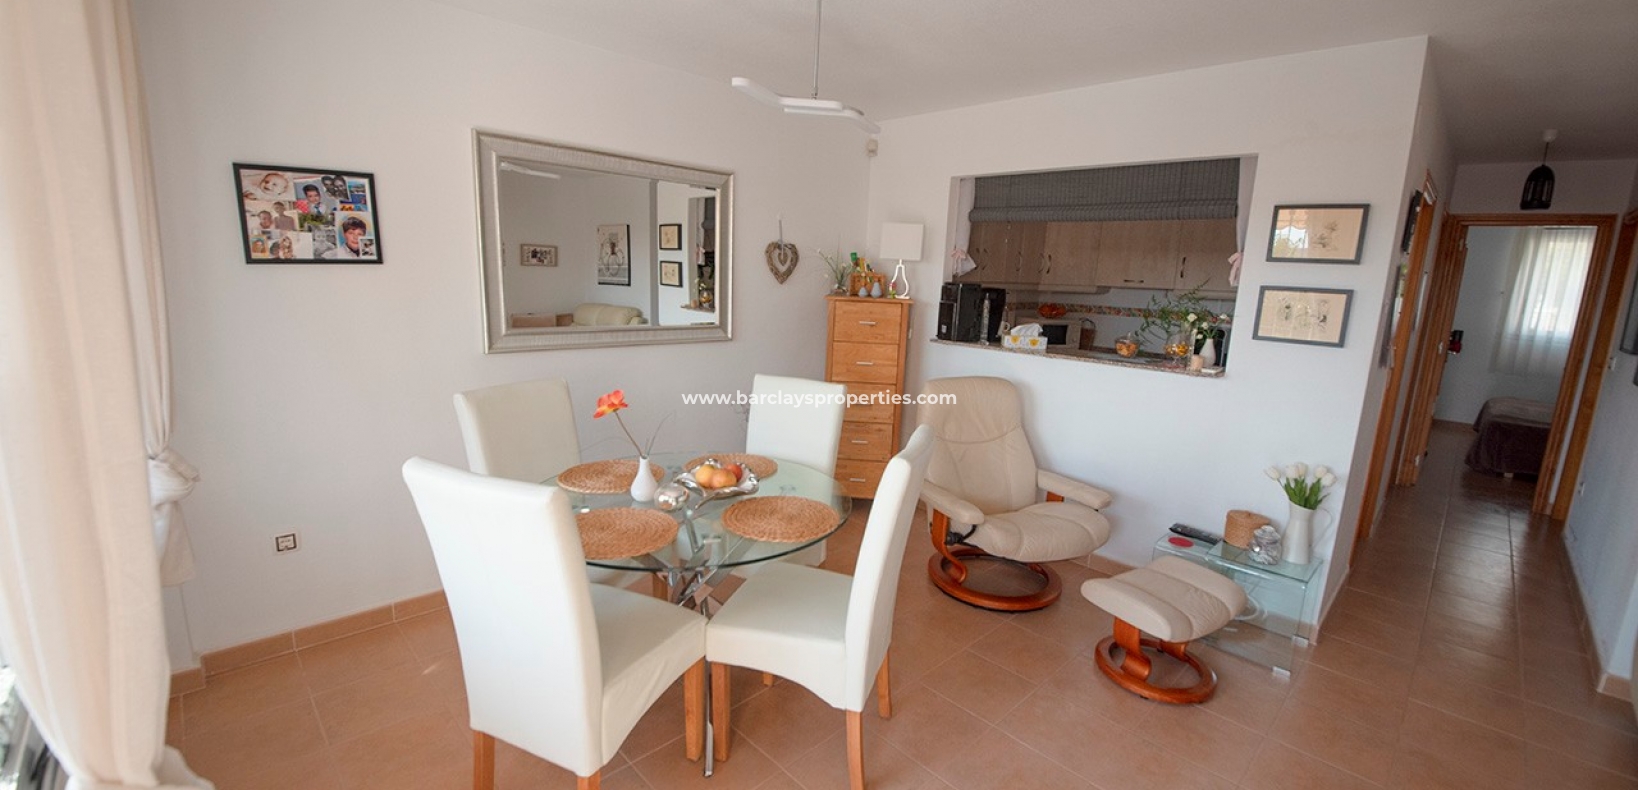 Town House Style Property for Sale in La Marina, Alicante Spain. - living room